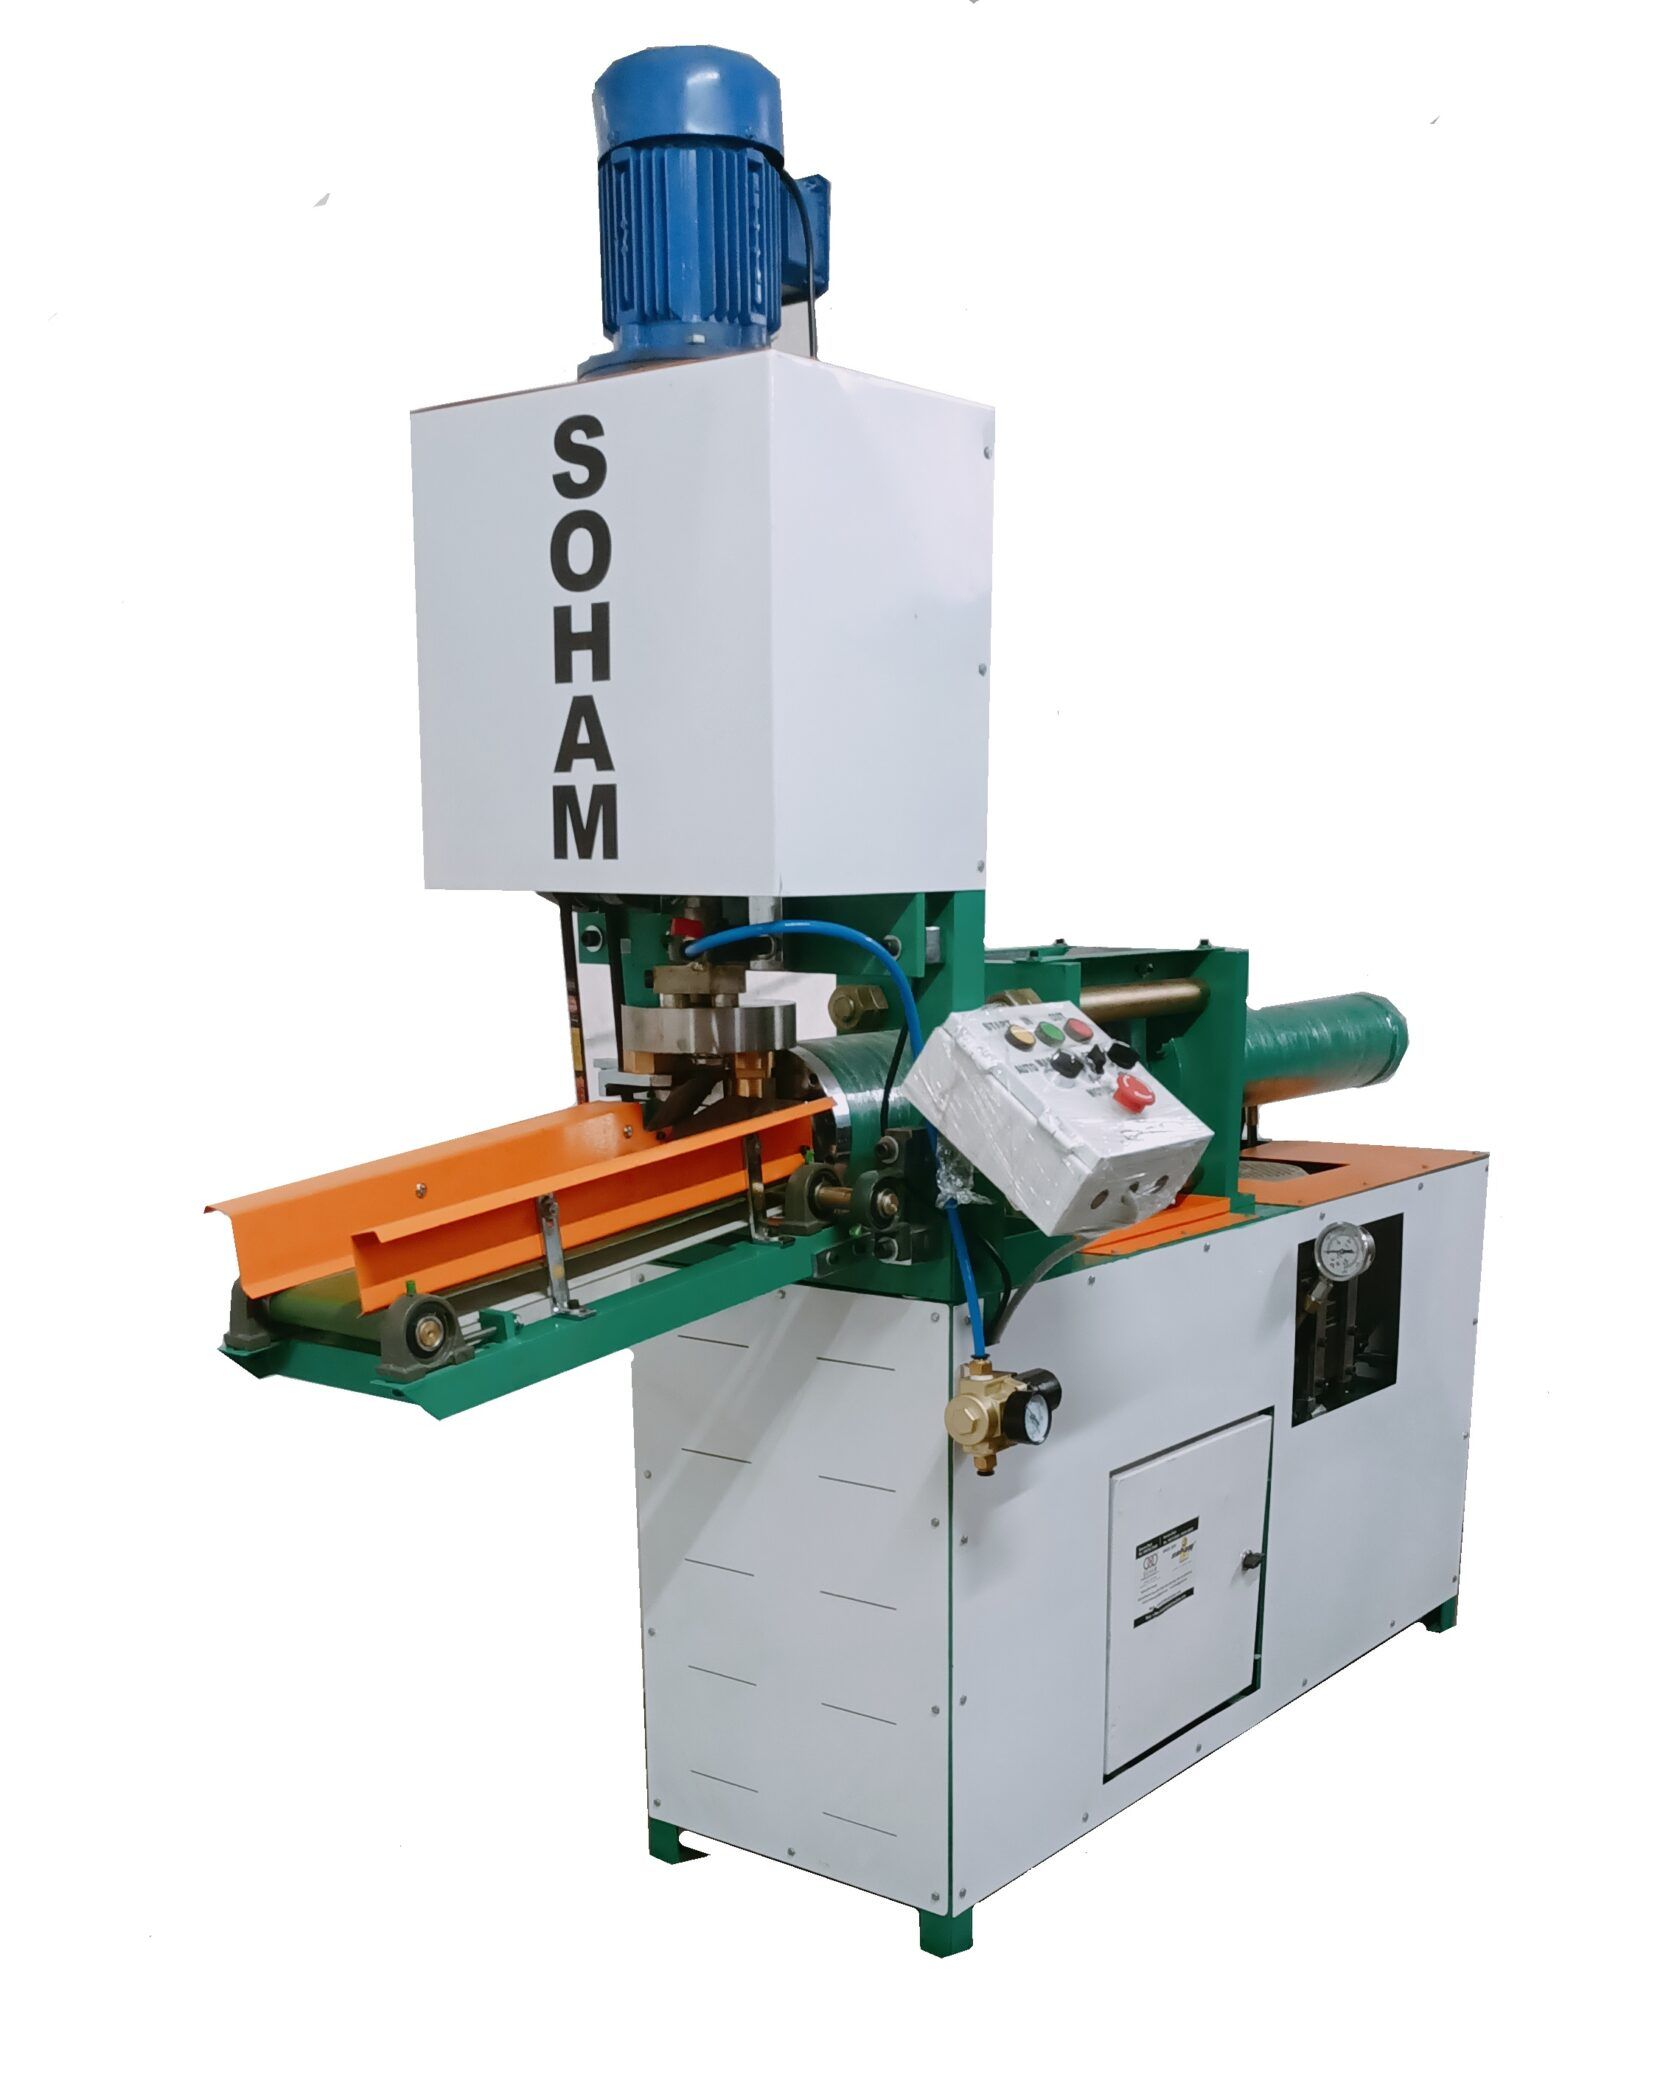 Primary requirement for Dhoop cone making machine heavy model